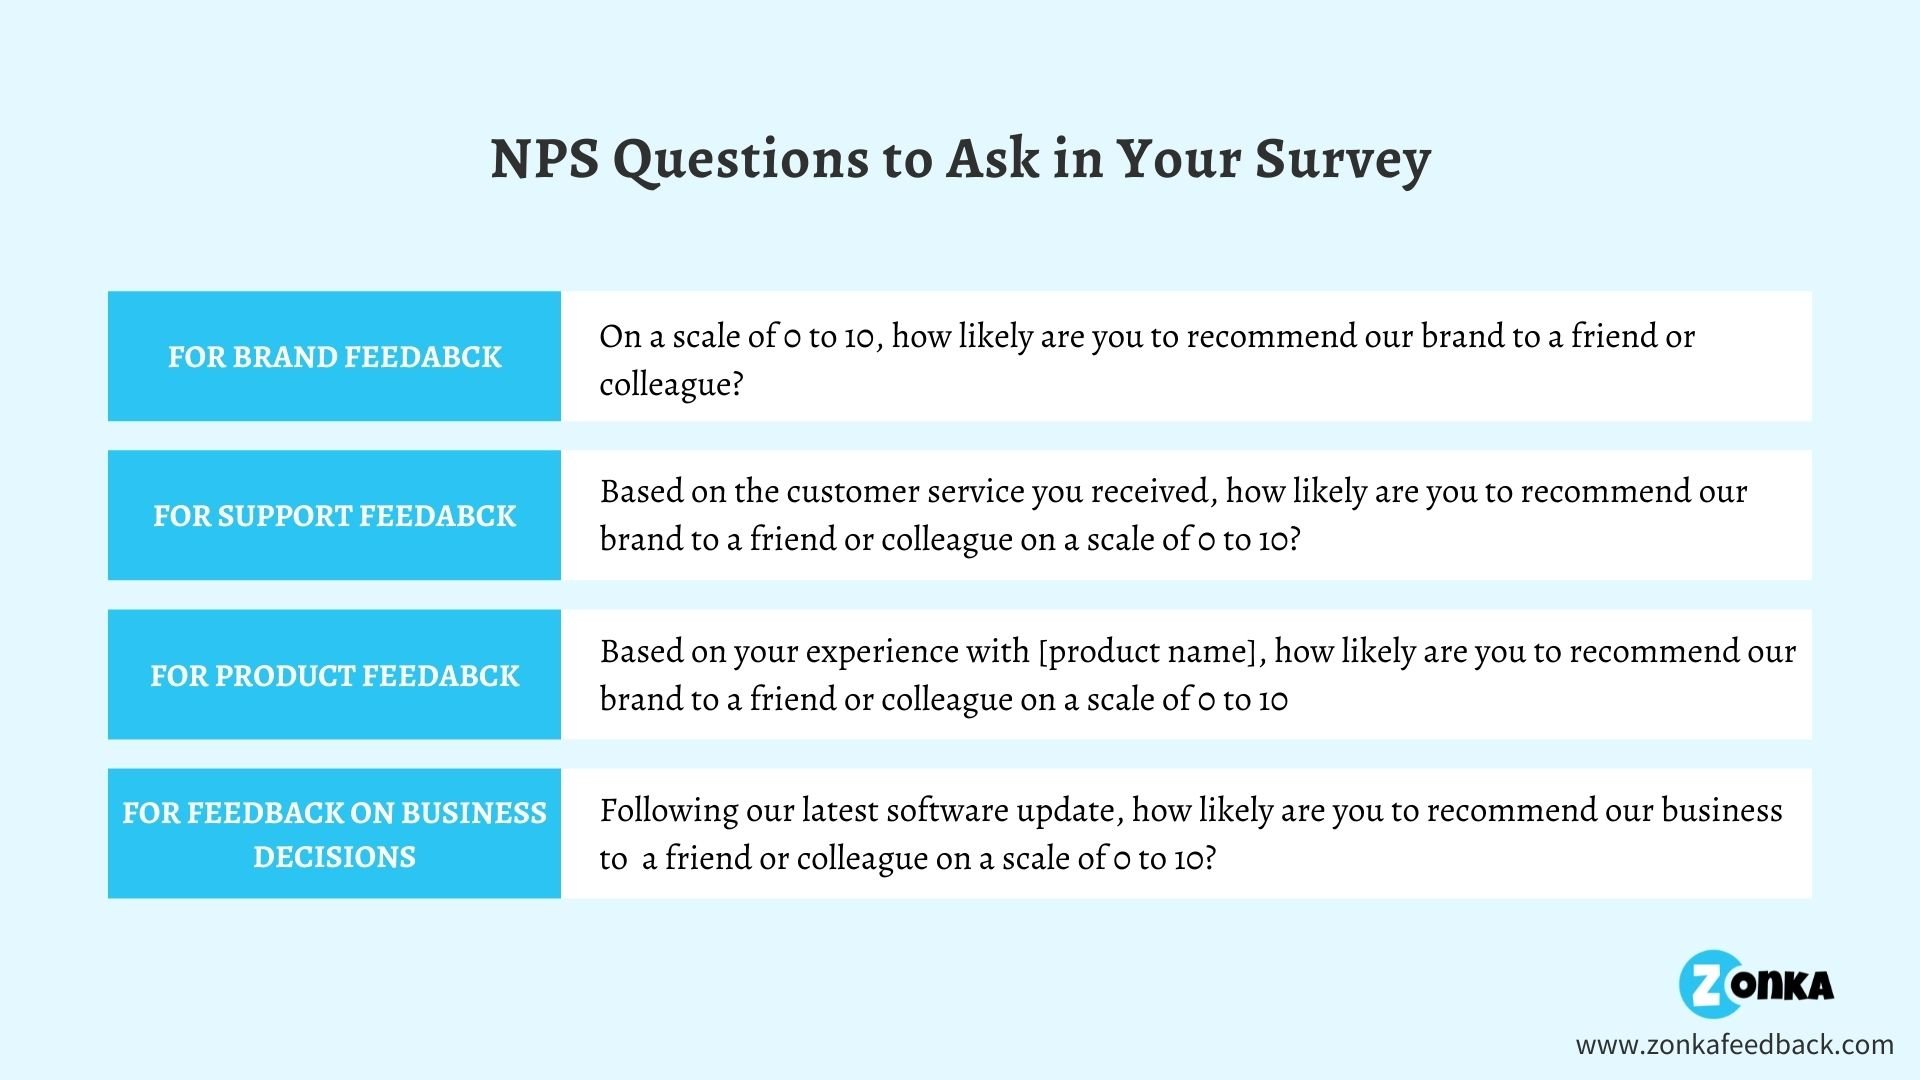 NPS Questions to Ask in Your Survey (1)